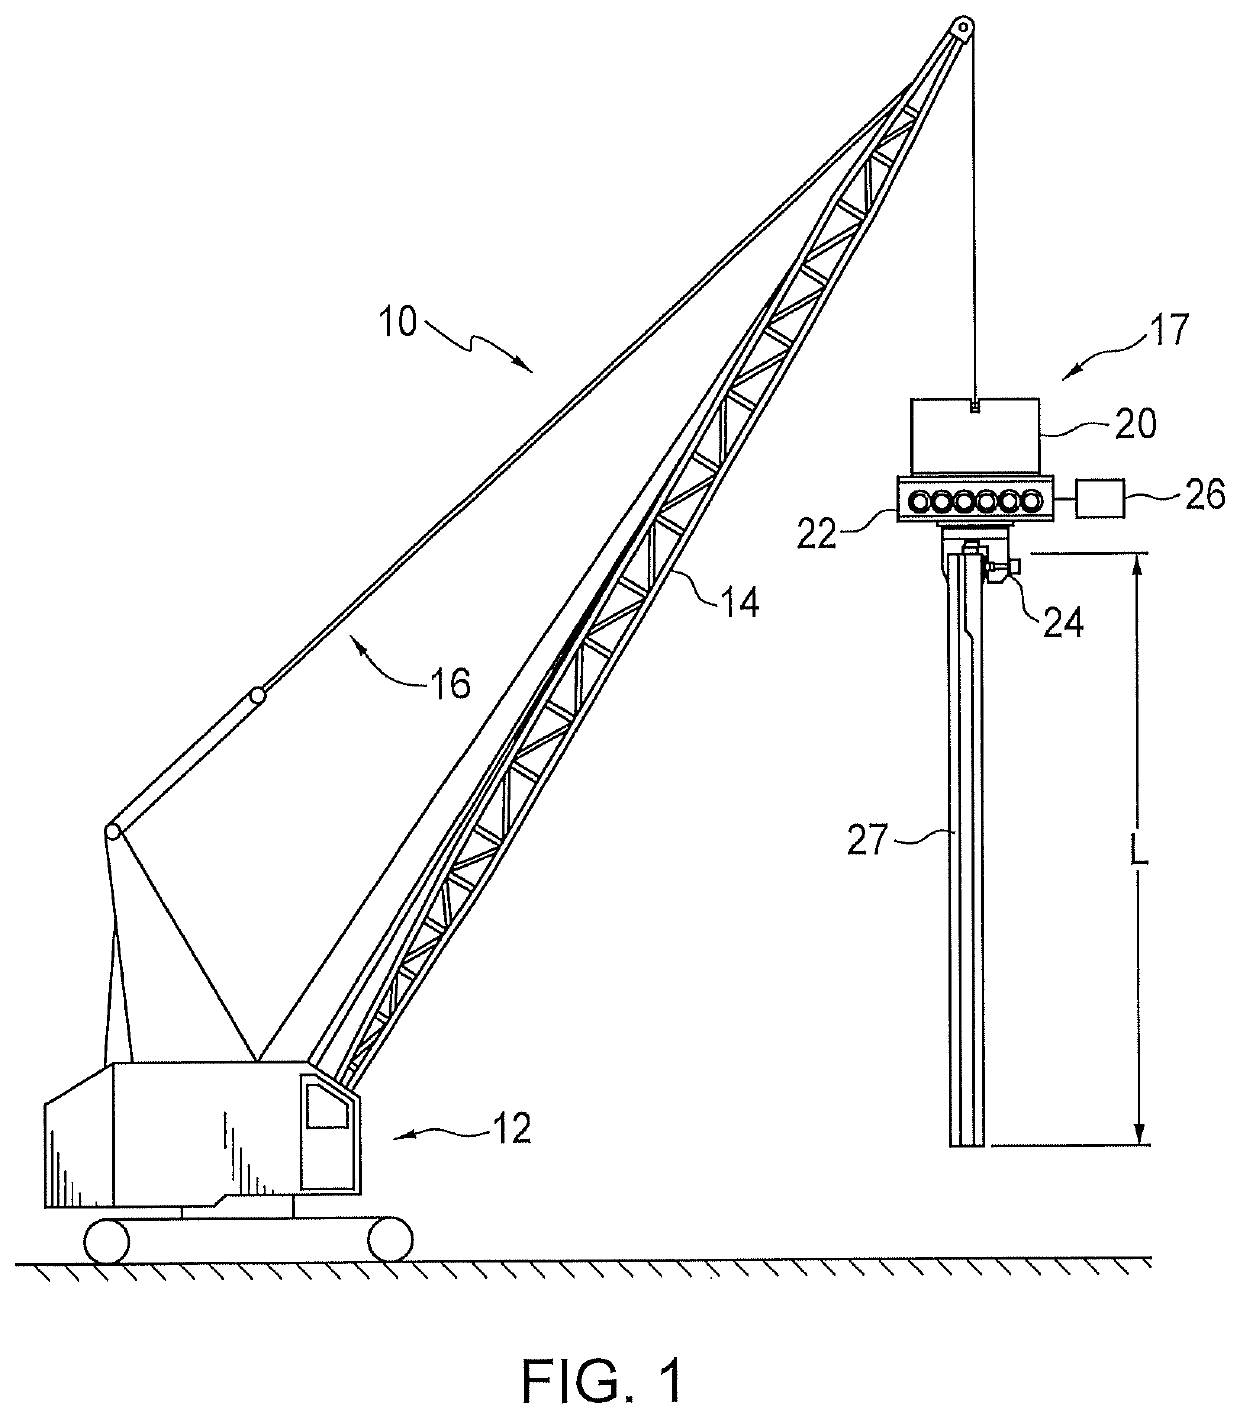 Lubrication system for a vibratory pile driver